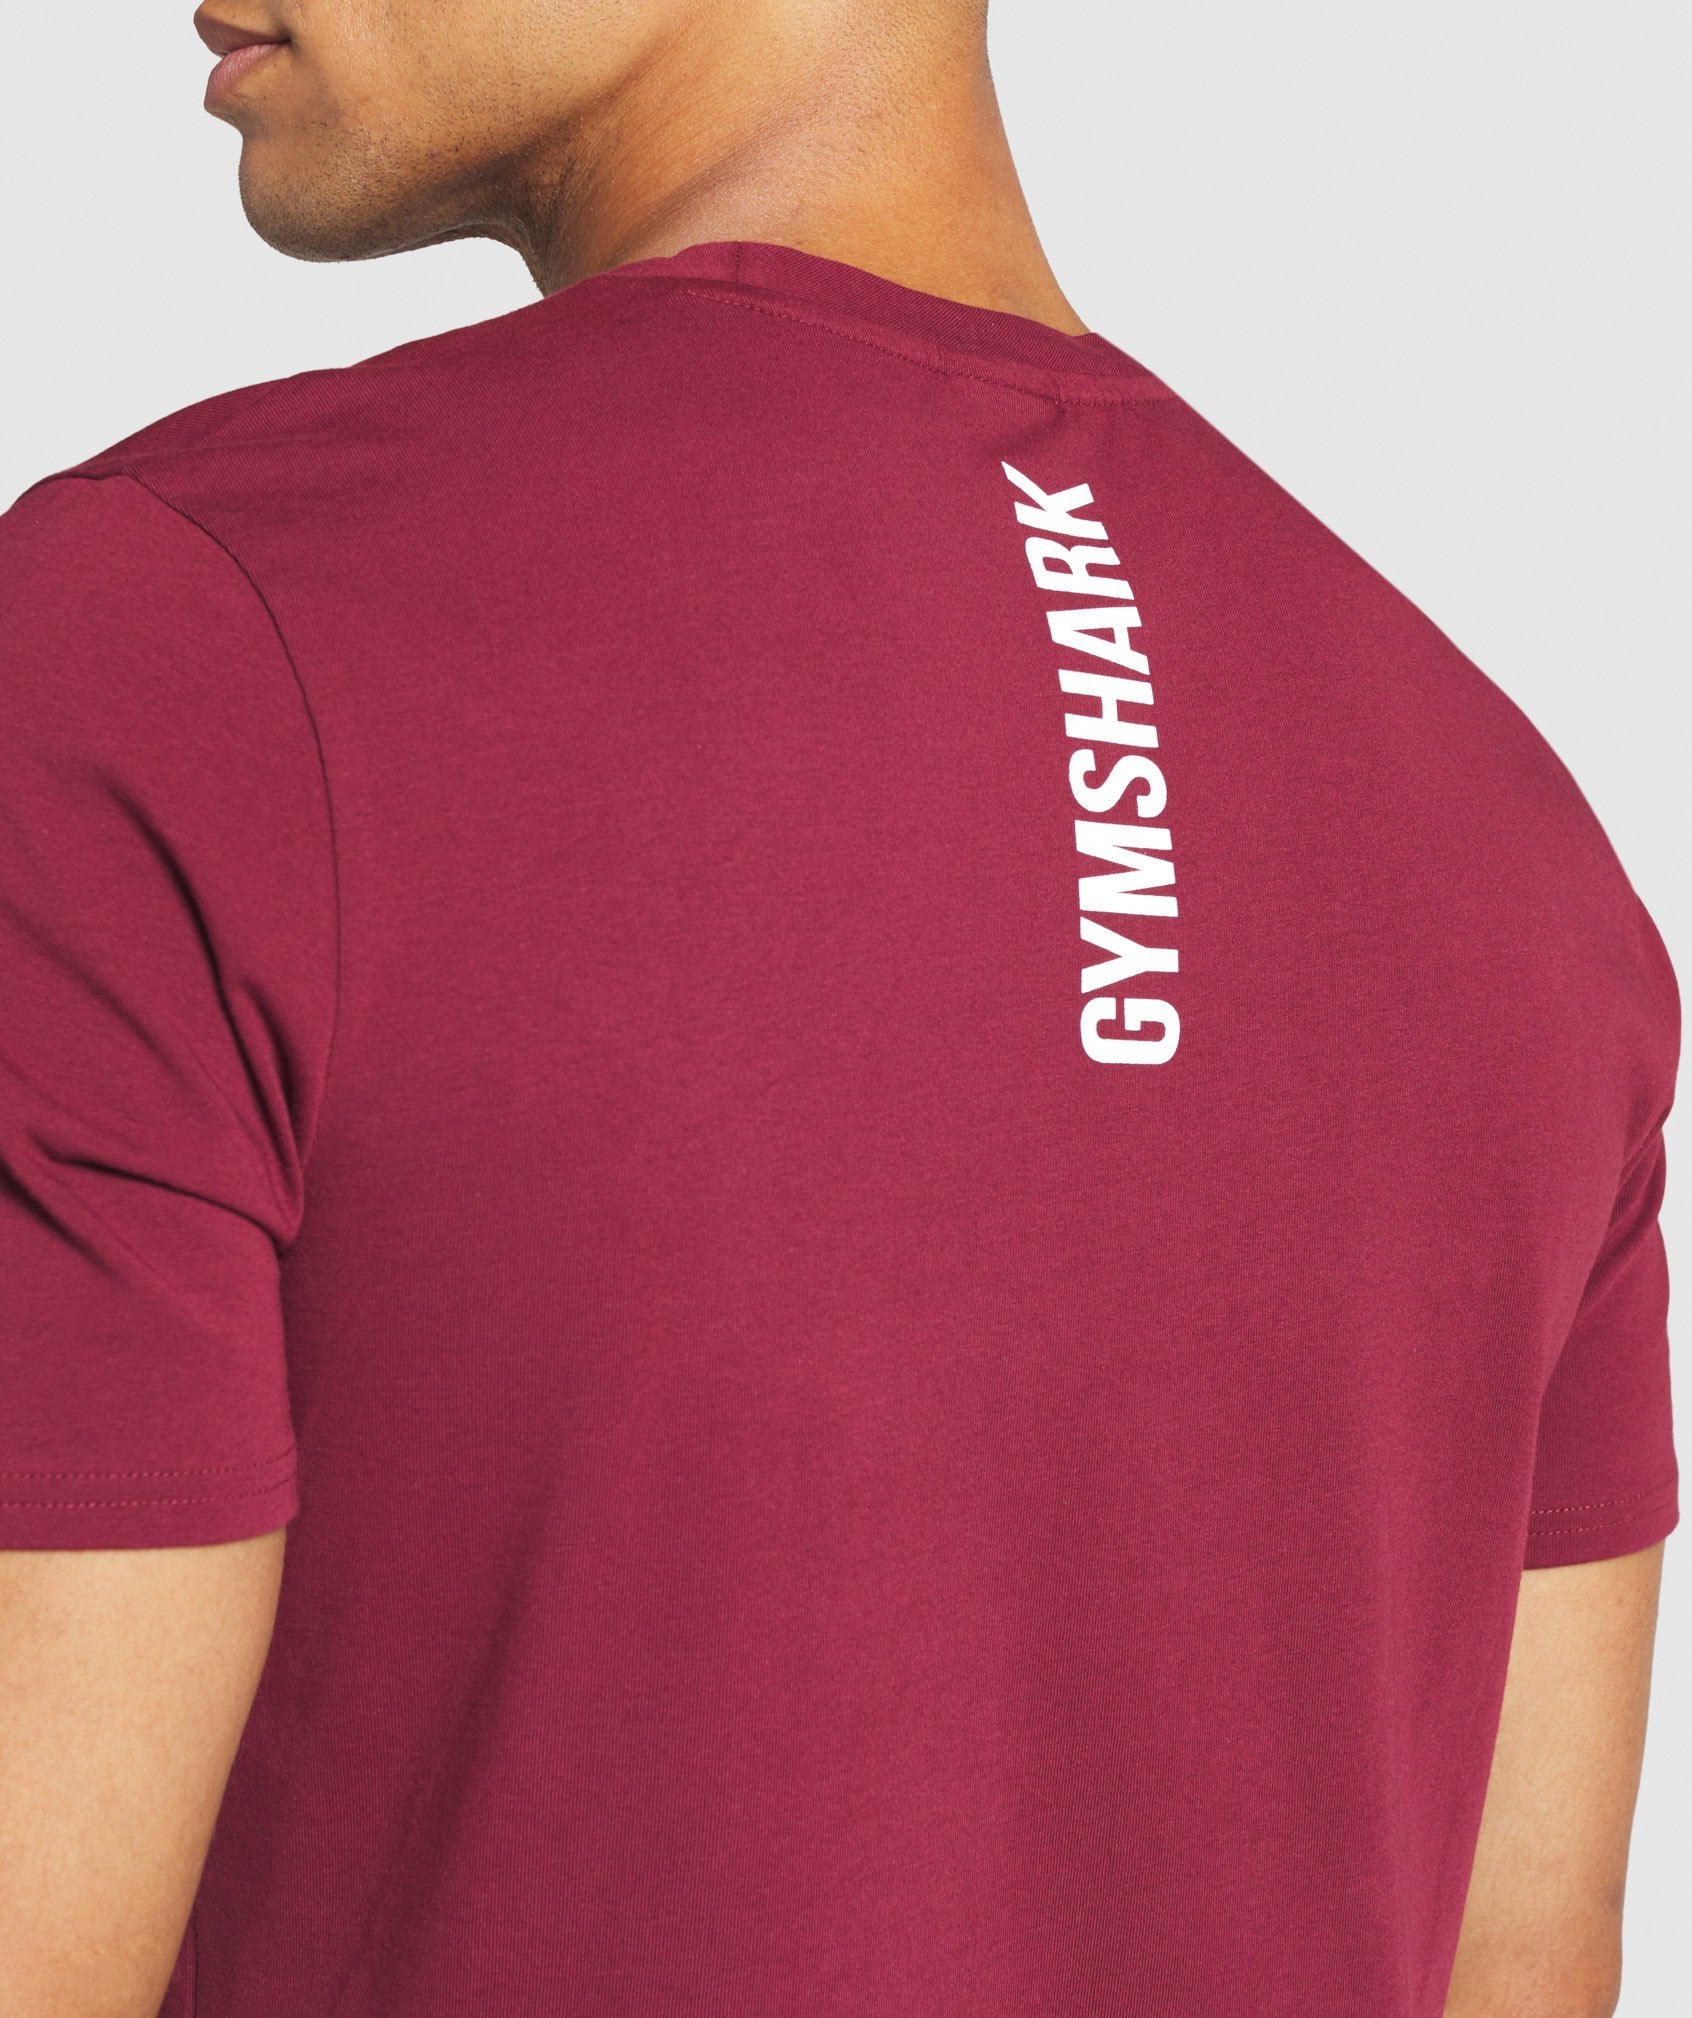 Graphic Infill T-Shirt in Claret